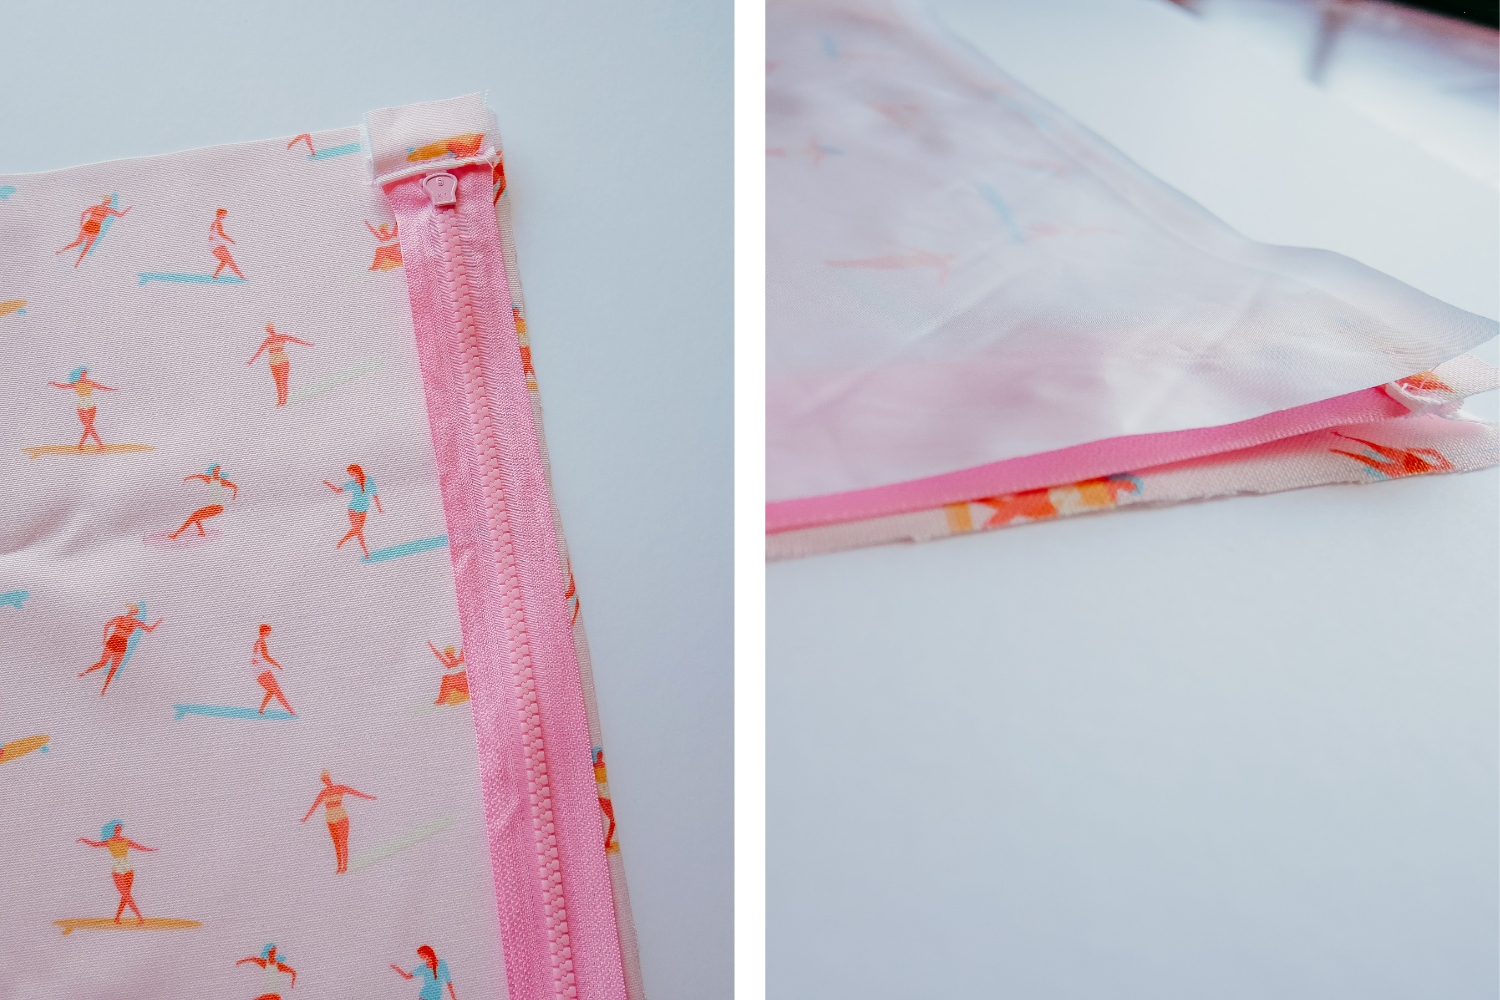 Two images have been combined into one rectangle. On the left, a pink zipper is lying face down on the top right edge of a rectangle of fabric. The fabric features a design with small female surfers surfing through a pink background. On the right, a rectangle piece of Polyurethane Laminate fabric is lying on top of a rectangle of fabric featuring a design with small female surfers surfing through a pink background. The edge of a pink zipper can be seen sandwiched between the two.